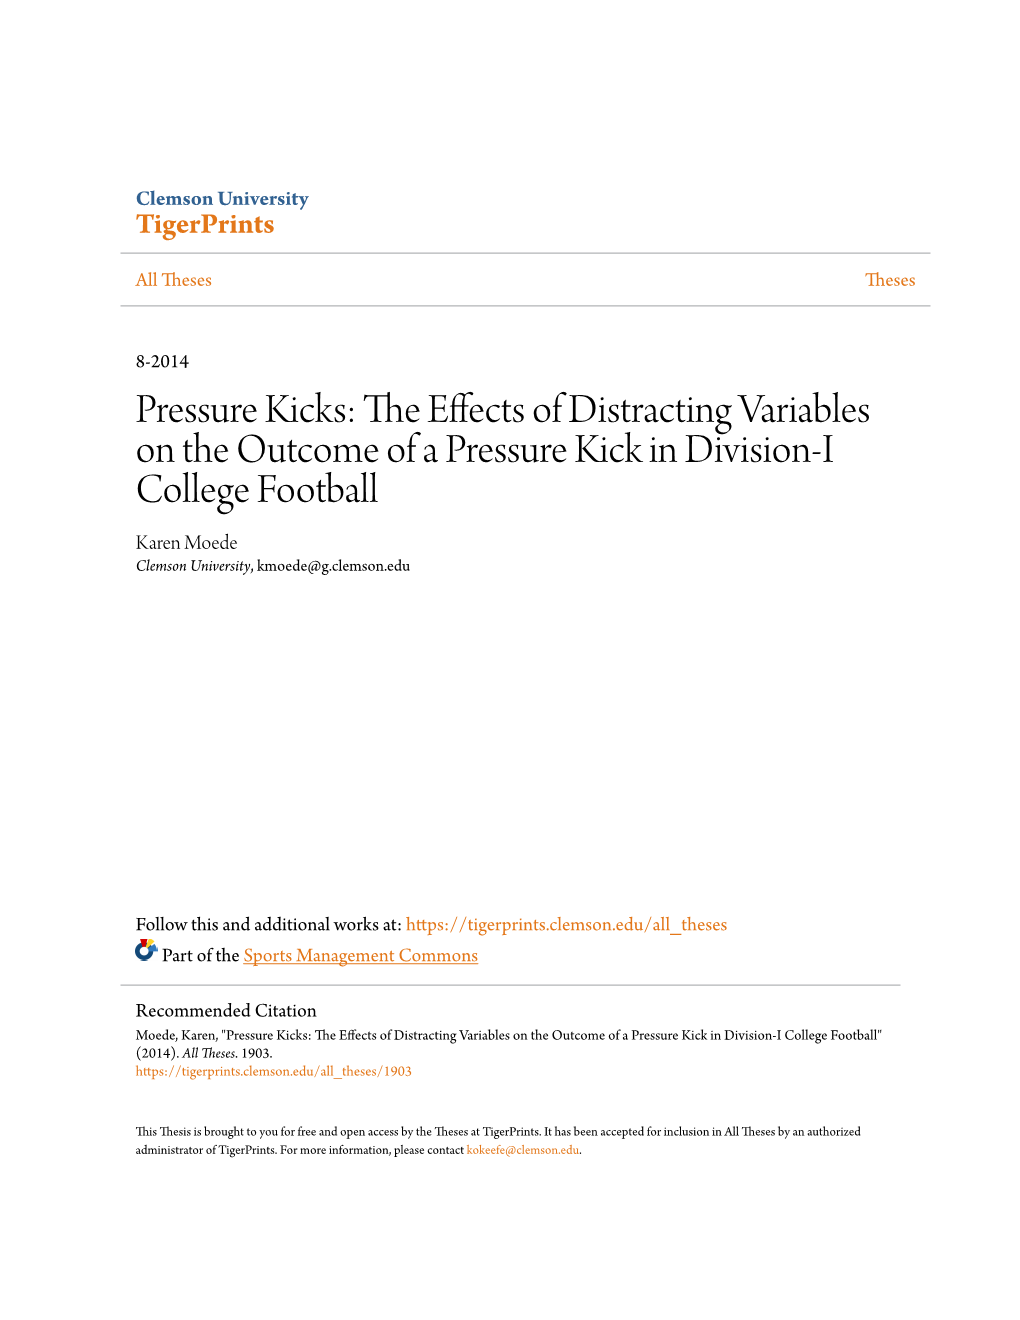 The Effects of Distracting Variables on the Outcome of a Pressure Kick in Division-I College Football" (2014)